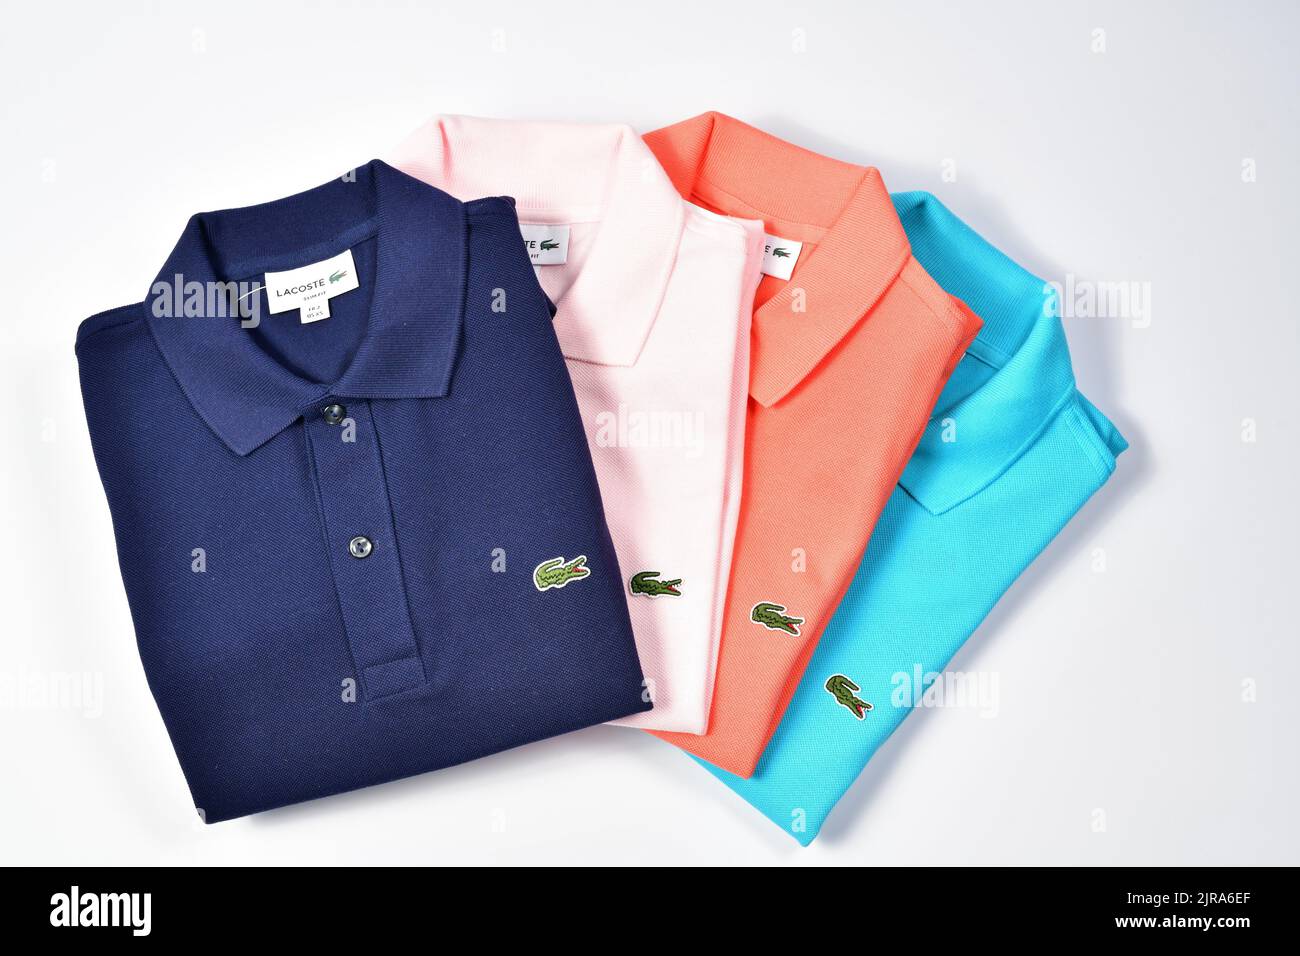 Classical Lacoste polo shirts in various colours, dark blue, pink, range and pale blue, adorned with a green embroidered contrasting crocodile design Stock Photo